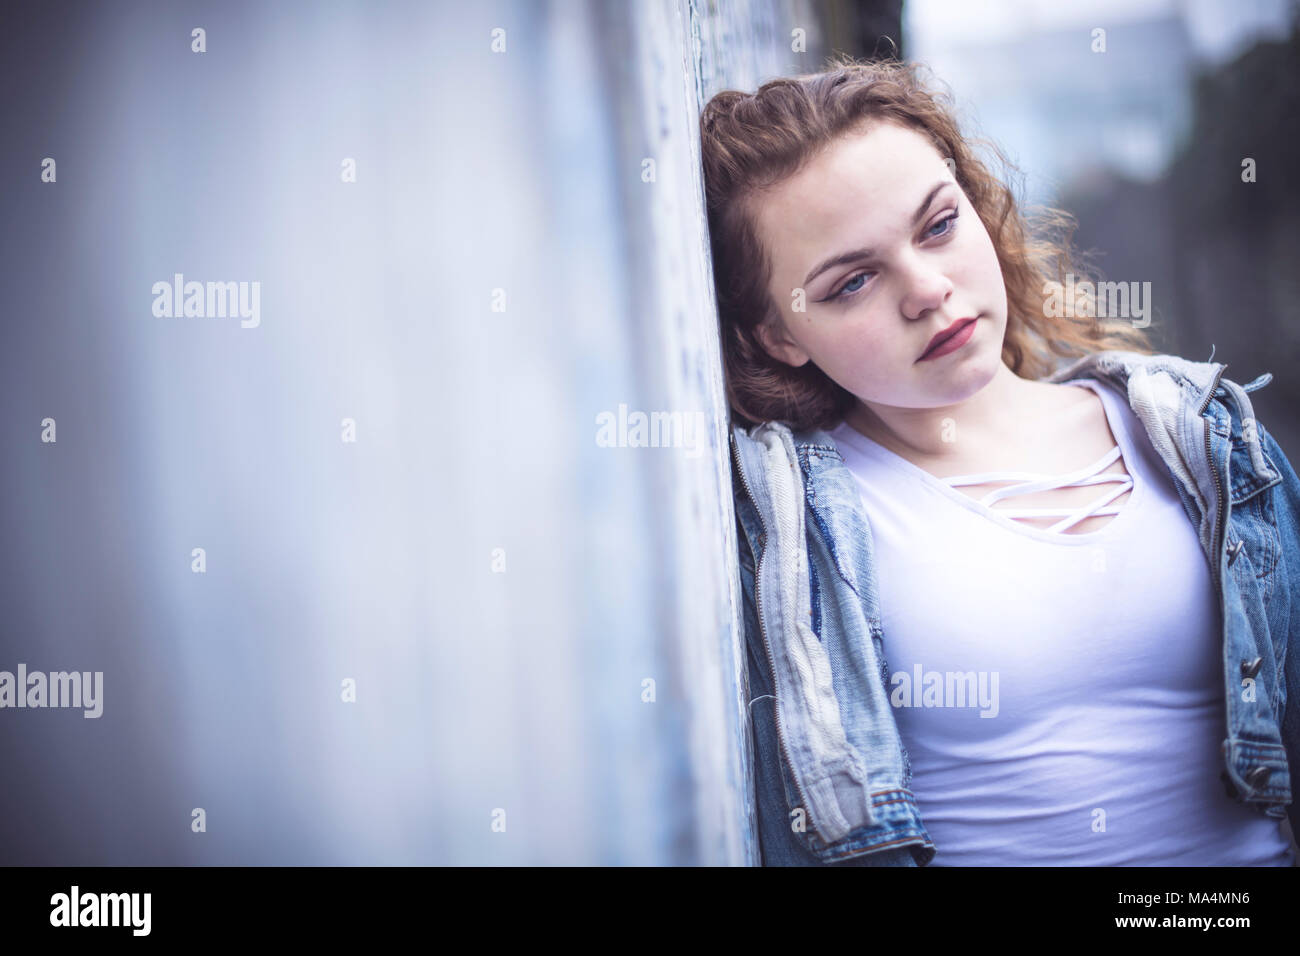 Sultry Teen Girl Stockfotos And Sultry Teen Girl Bilder Alamy